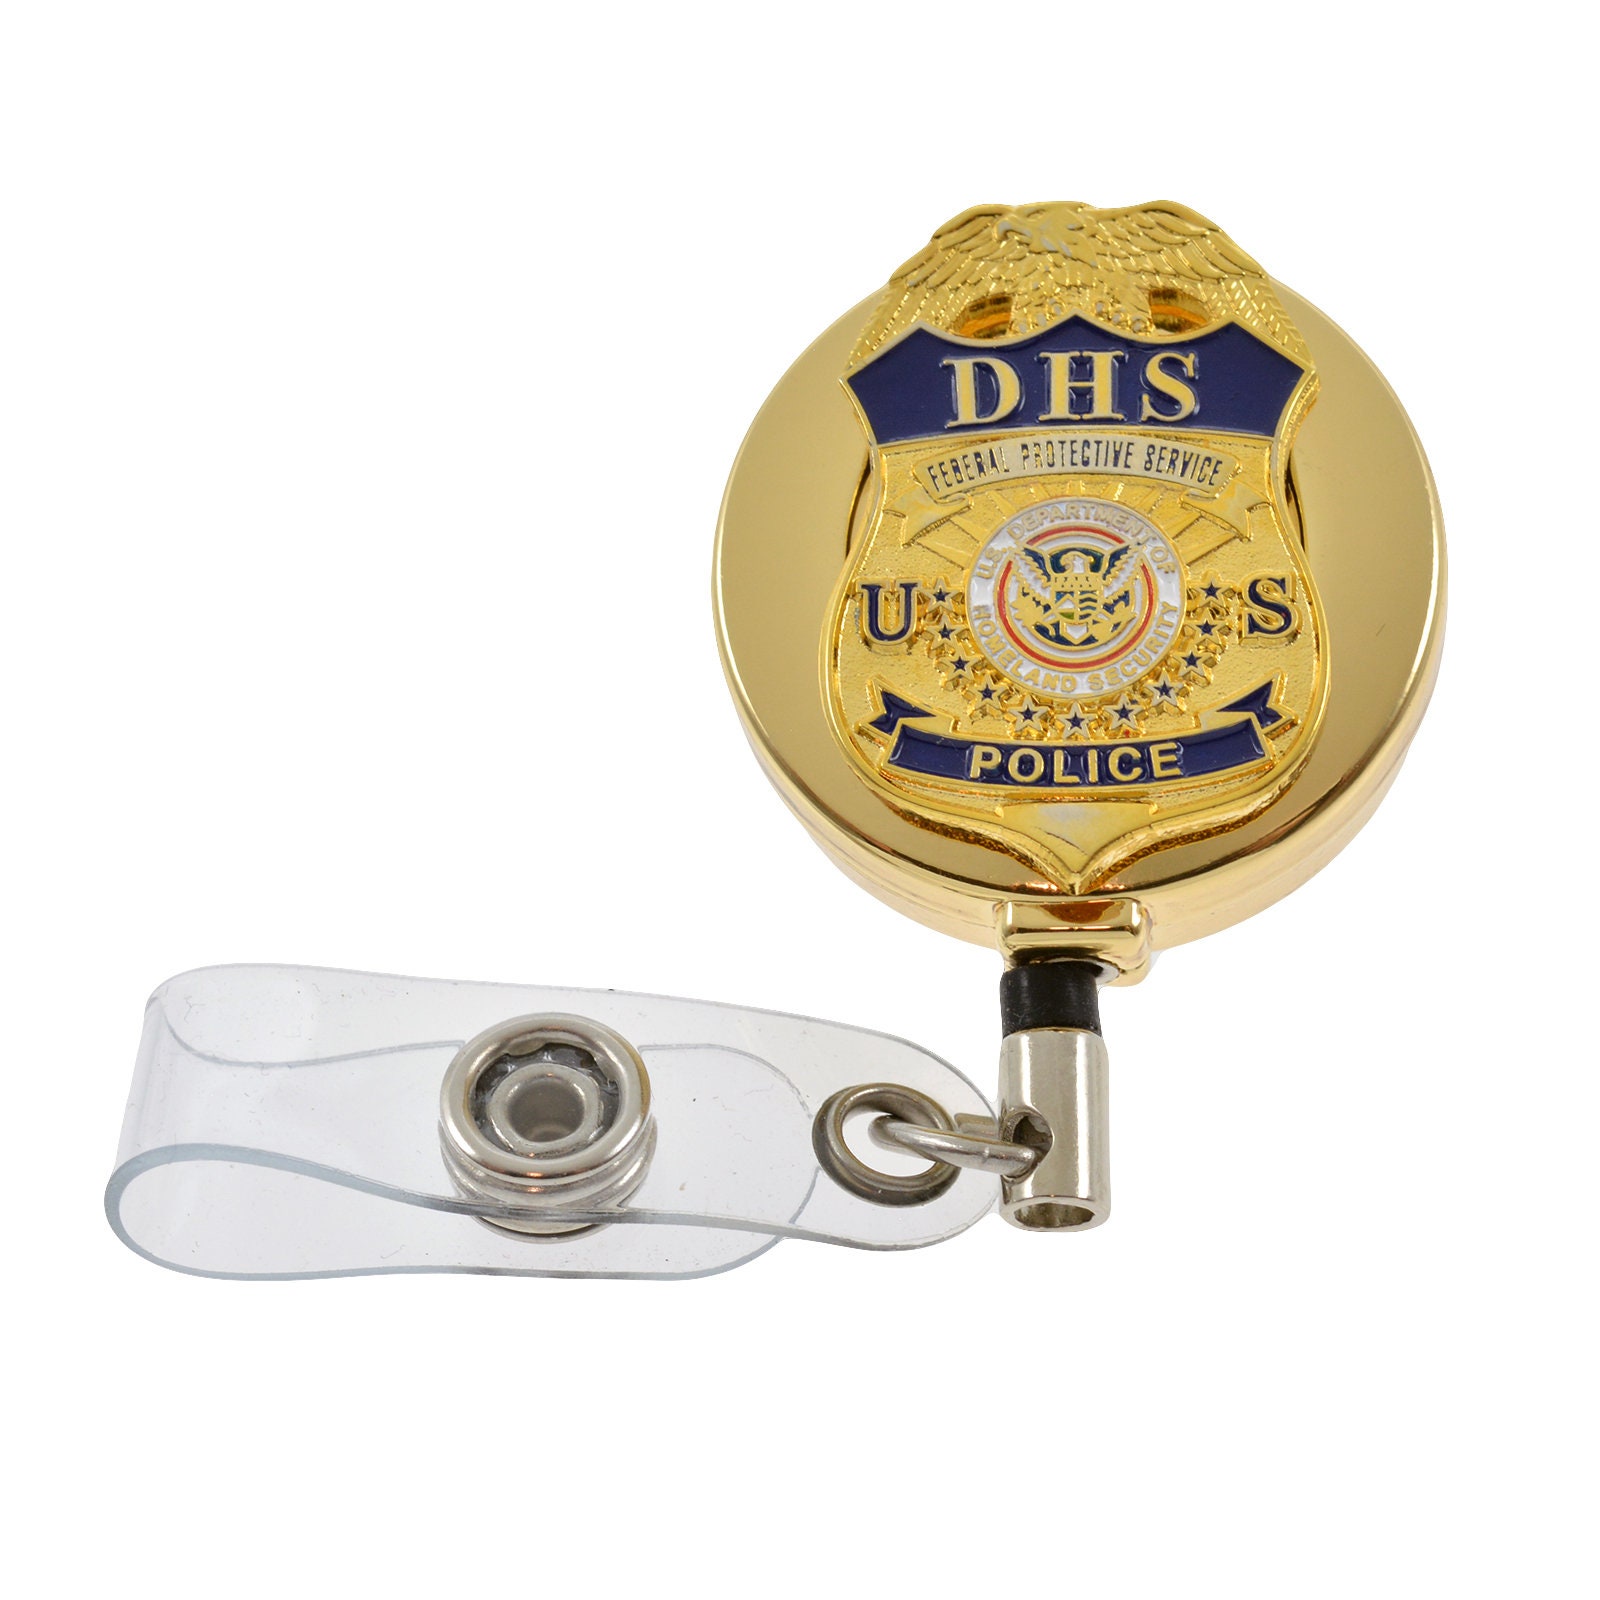 DHS Federal Protective Service Police Officer Badge Reel